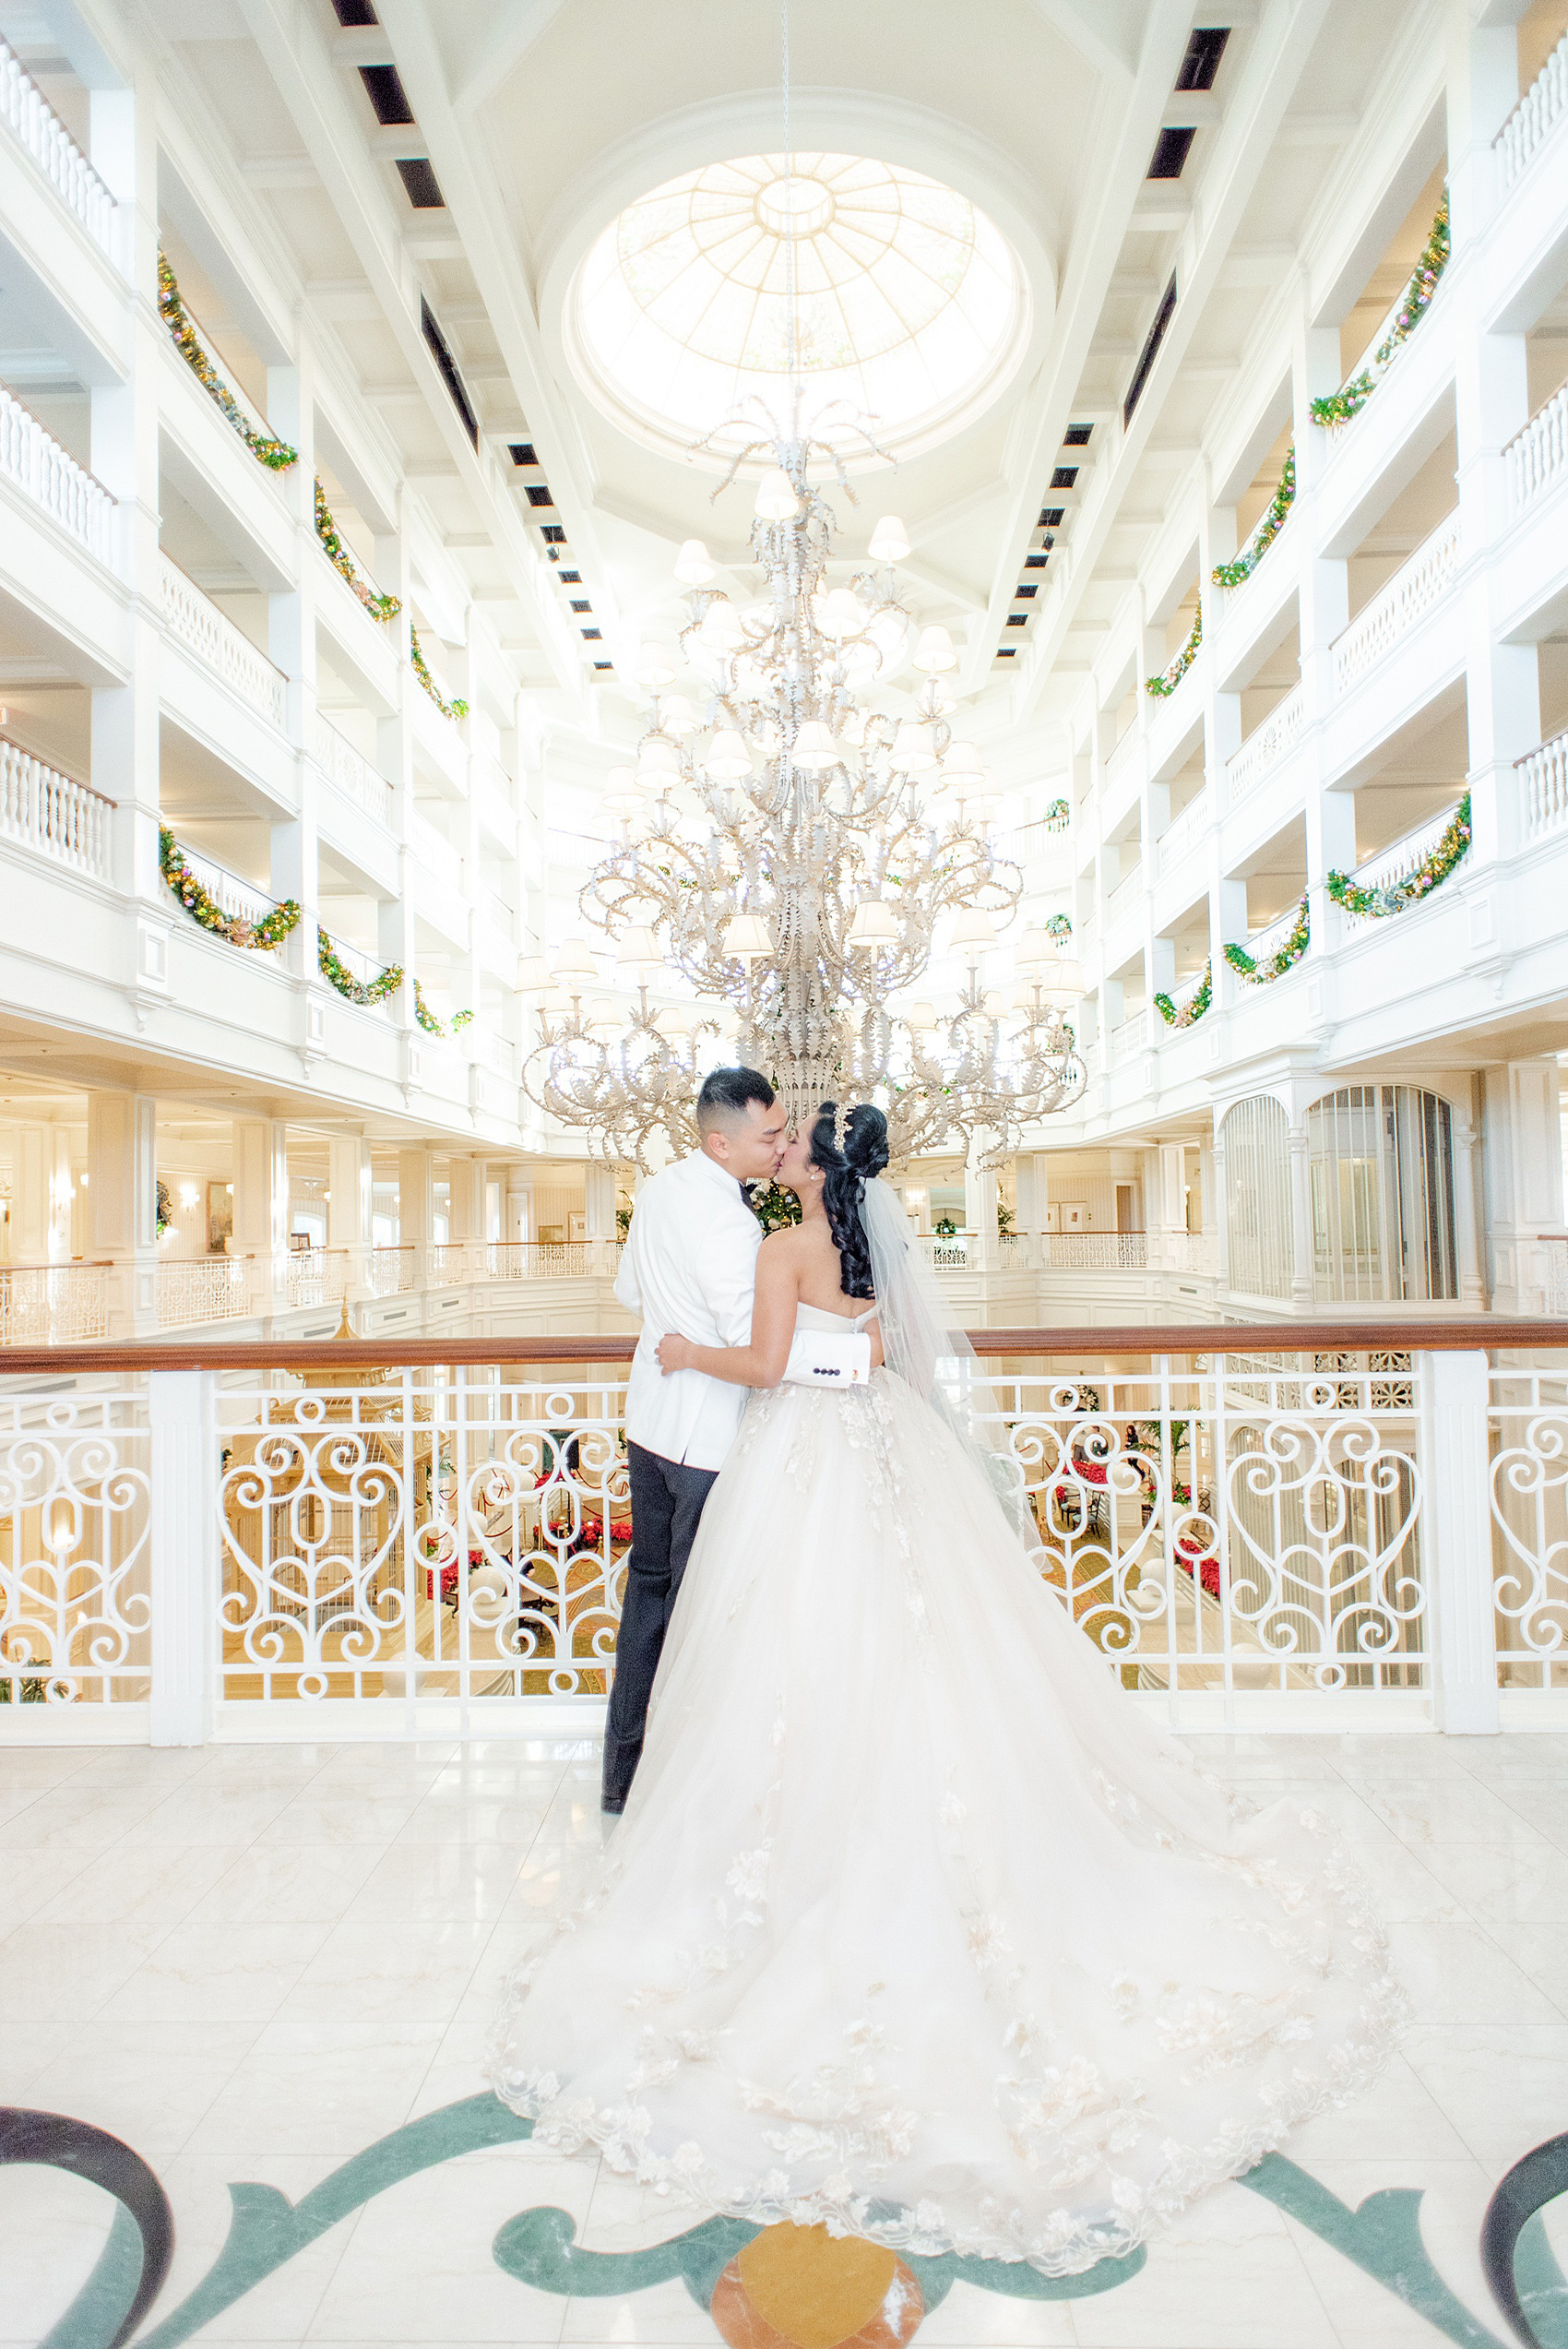 Walt Disney World wedding photos by Mikkel Paige Photography. The pictures were taken at a December wedding when the Grand Floridian and Wedding Pavilion were decorated with holiday flowers and twinkling lights! These ideas will stir a lot of inspiration for your own themed decorations whether centerpieces or bouquets. Click through for more from this fairy tale day! #mikkelpaige #disneywedding #disneyweddingphotos #disneyweddingphotographer #DisneyBride #disneyfairytalewedding